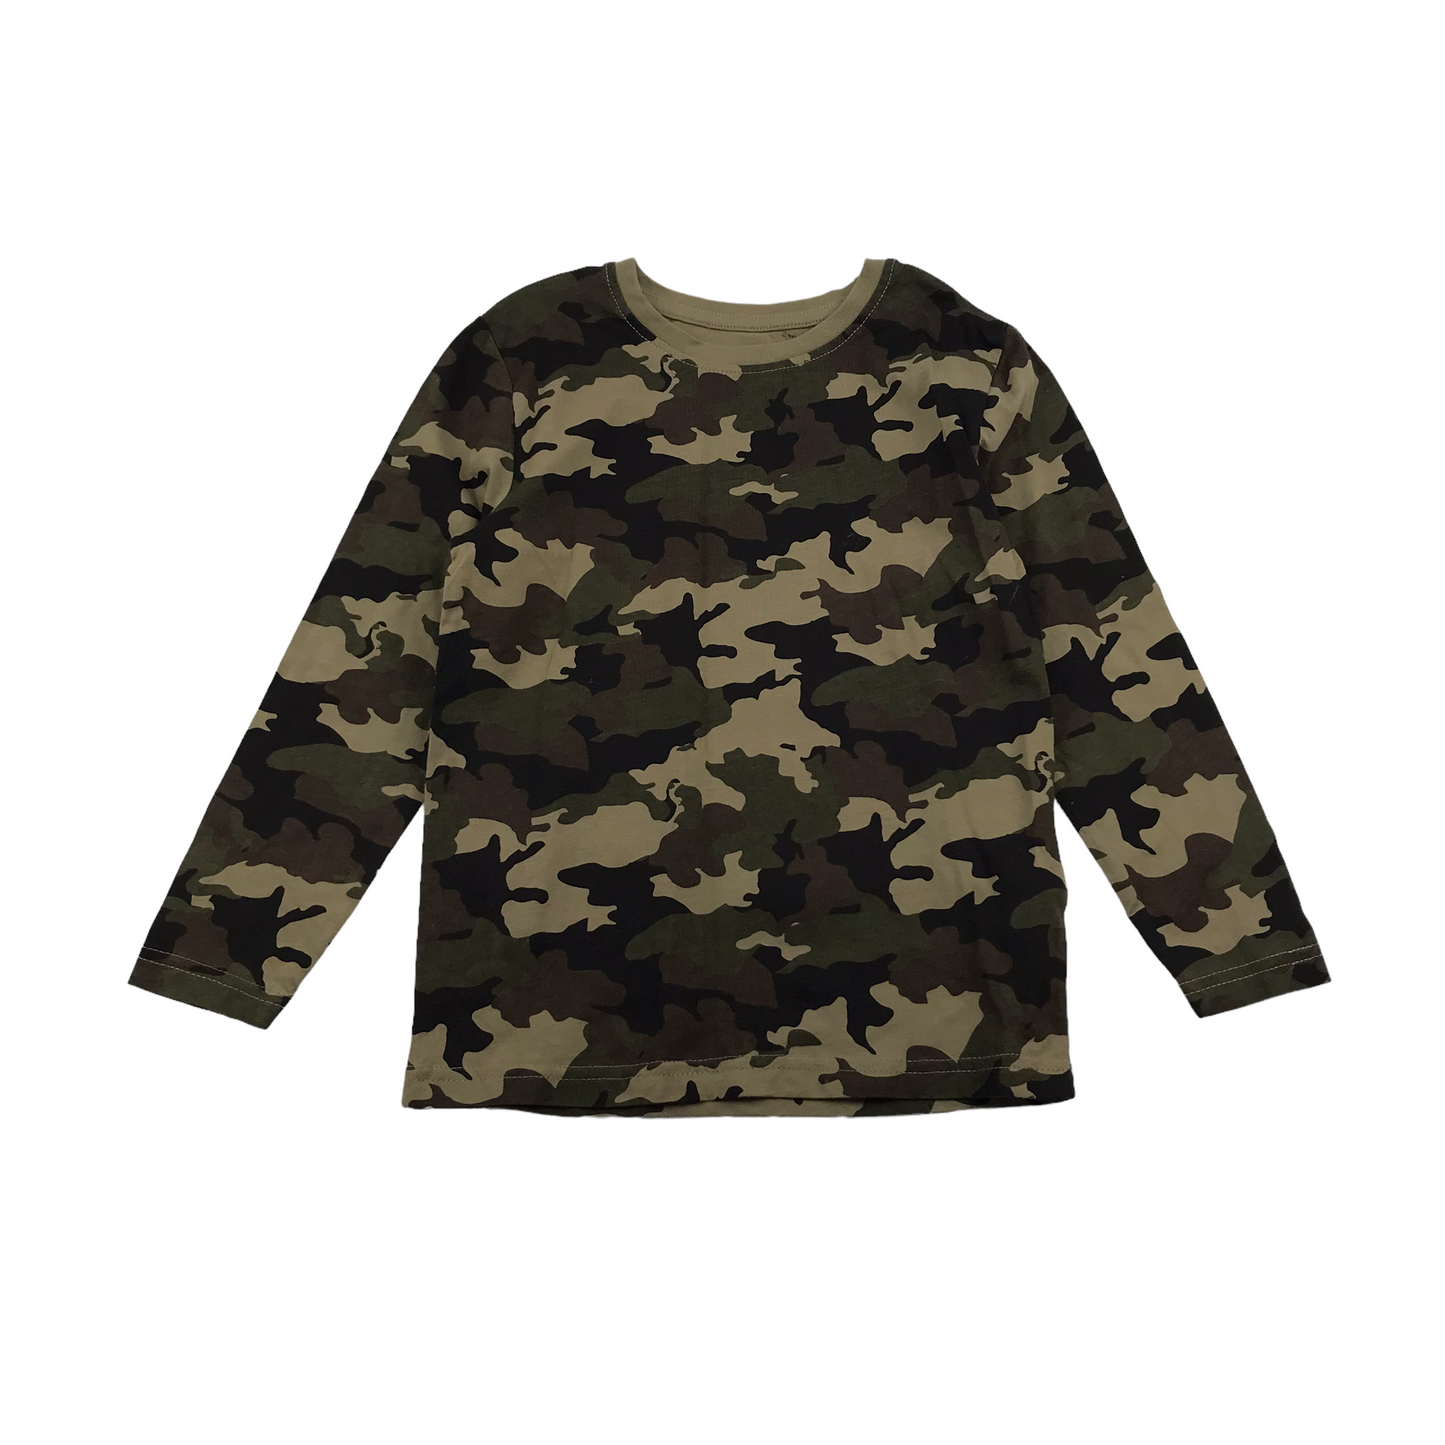 Primark Green and Brown Camo T-shirt Age 5